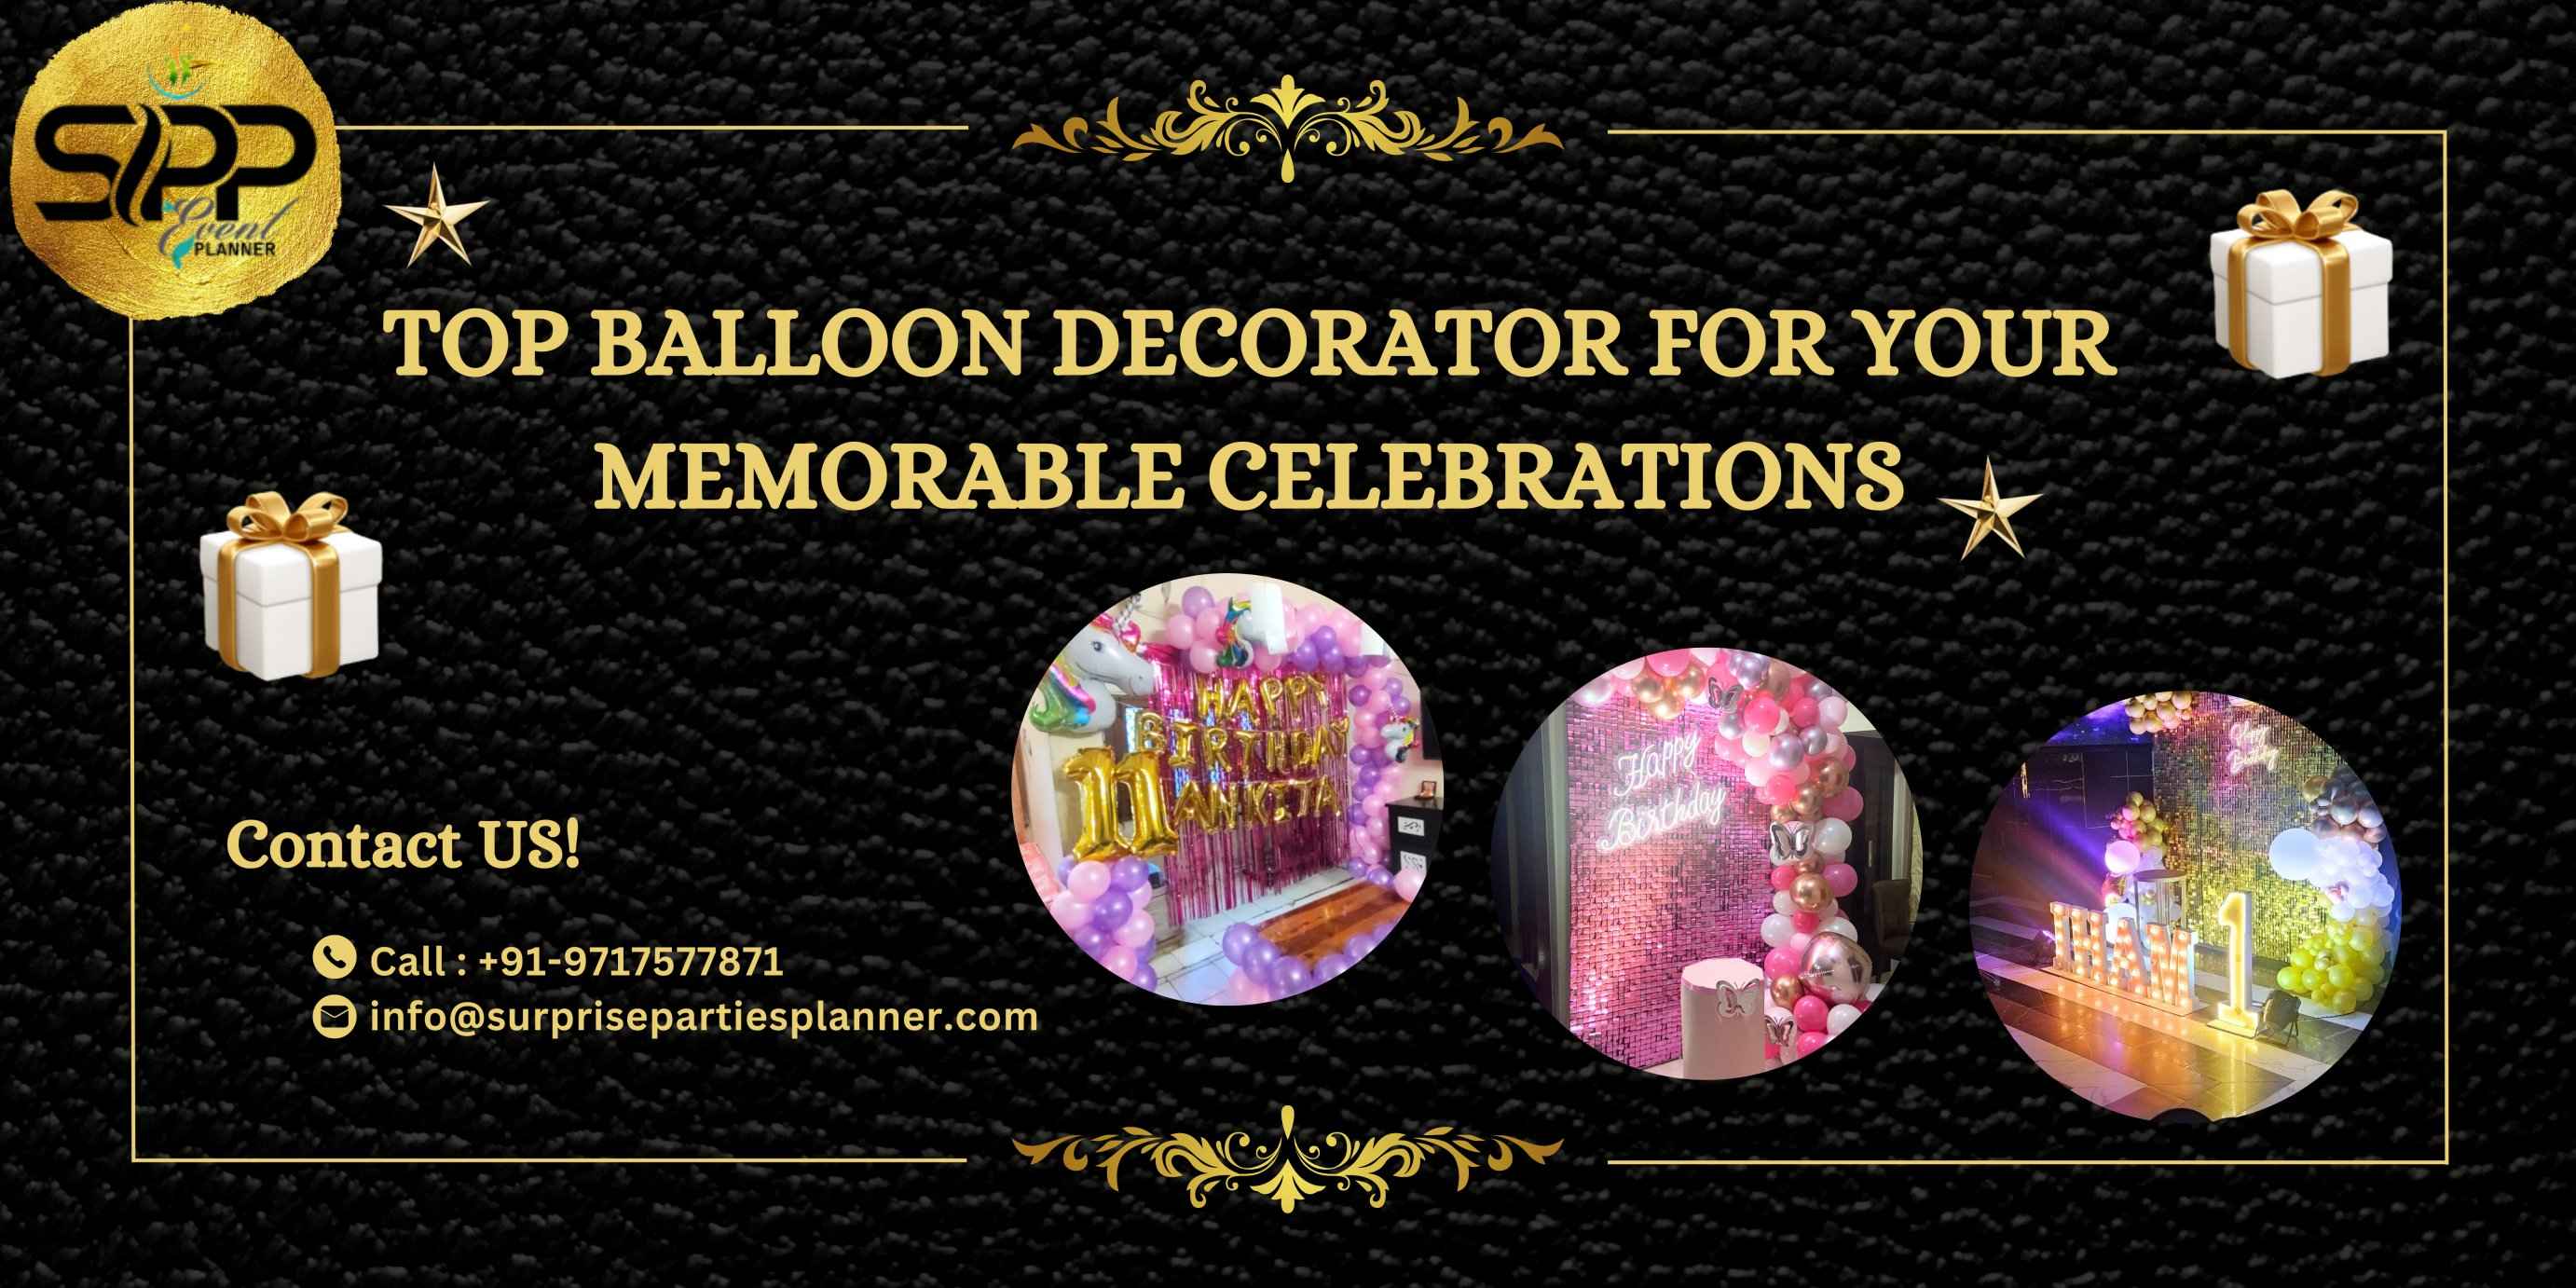 Top Balloon Decorator For Your Memorable Celebrations